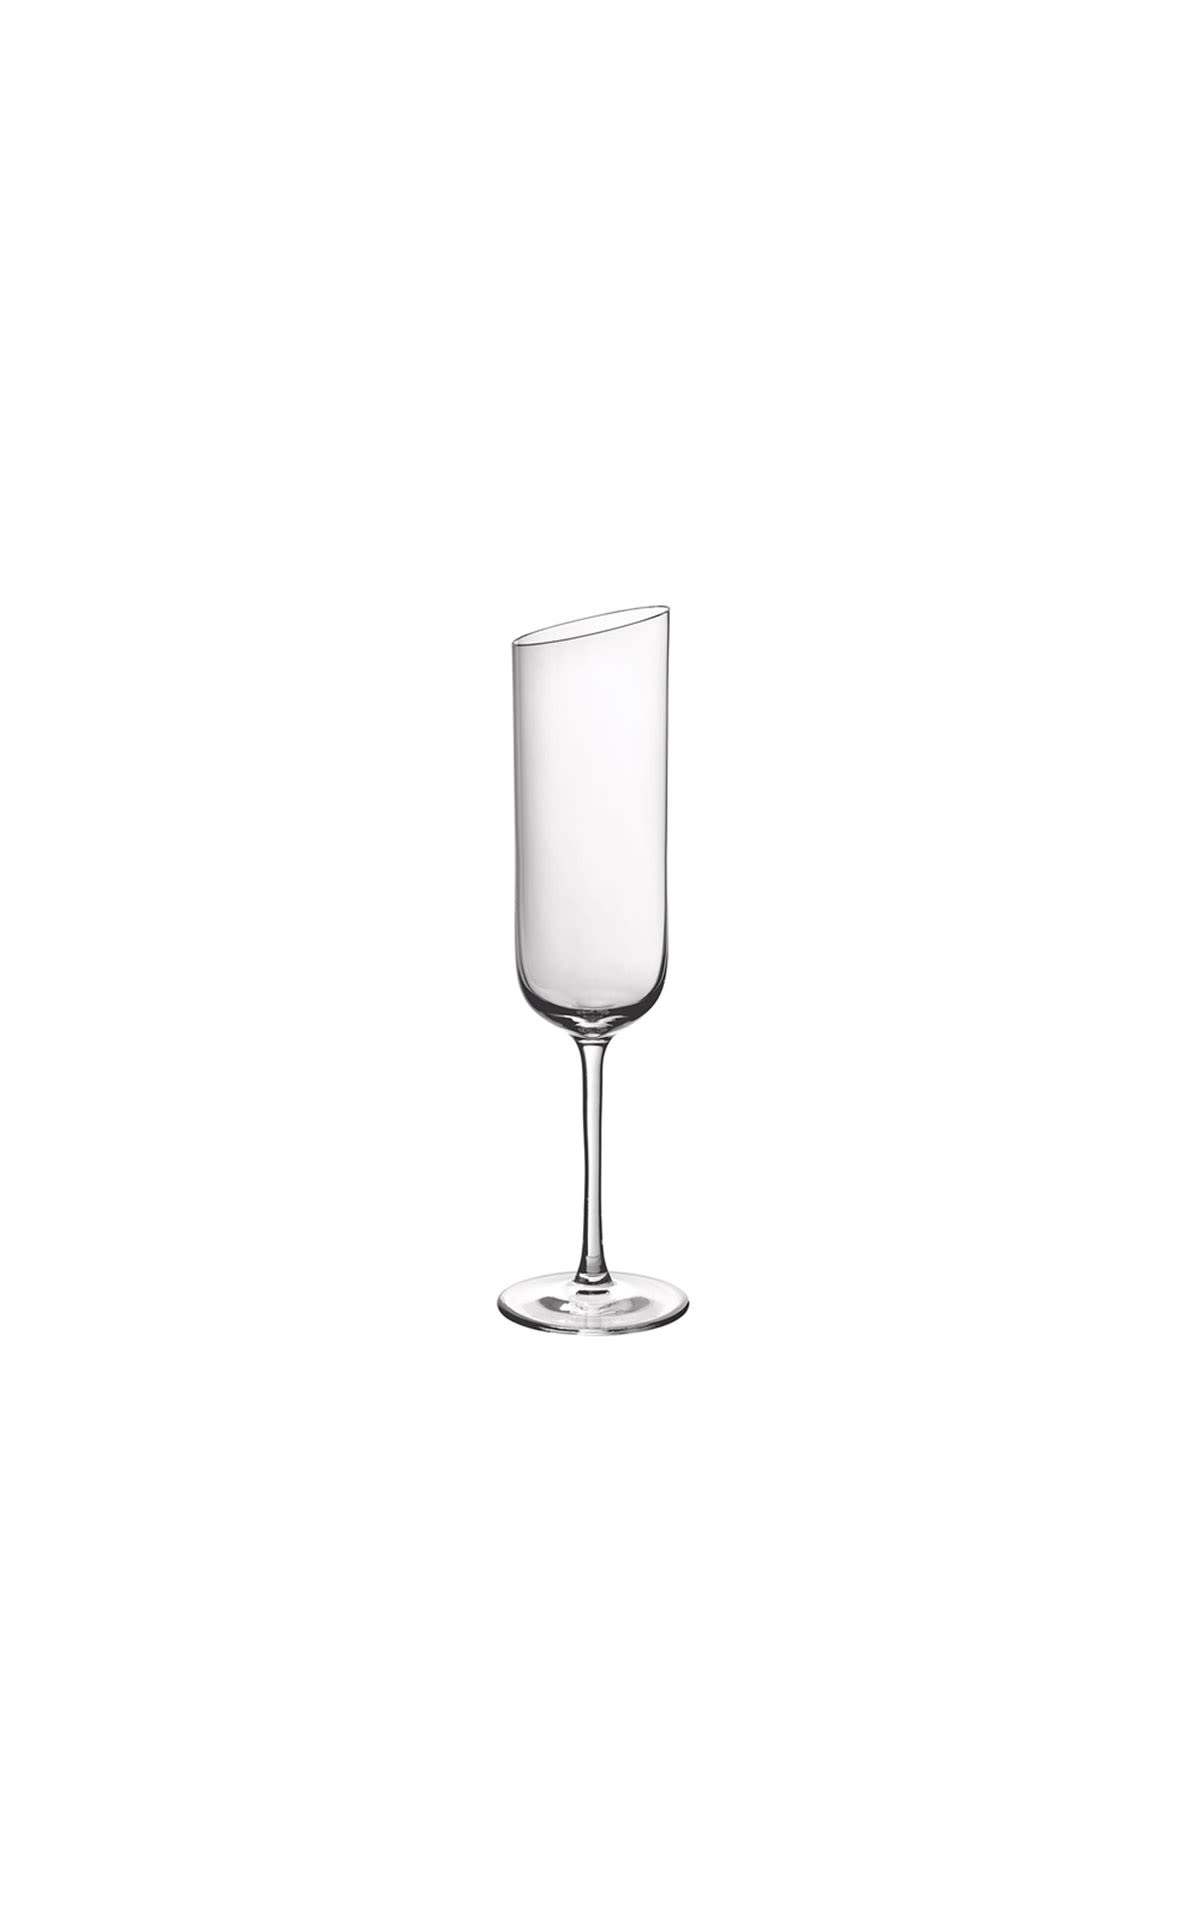 Villeroy & Boch New moon champagne from Bicester Village